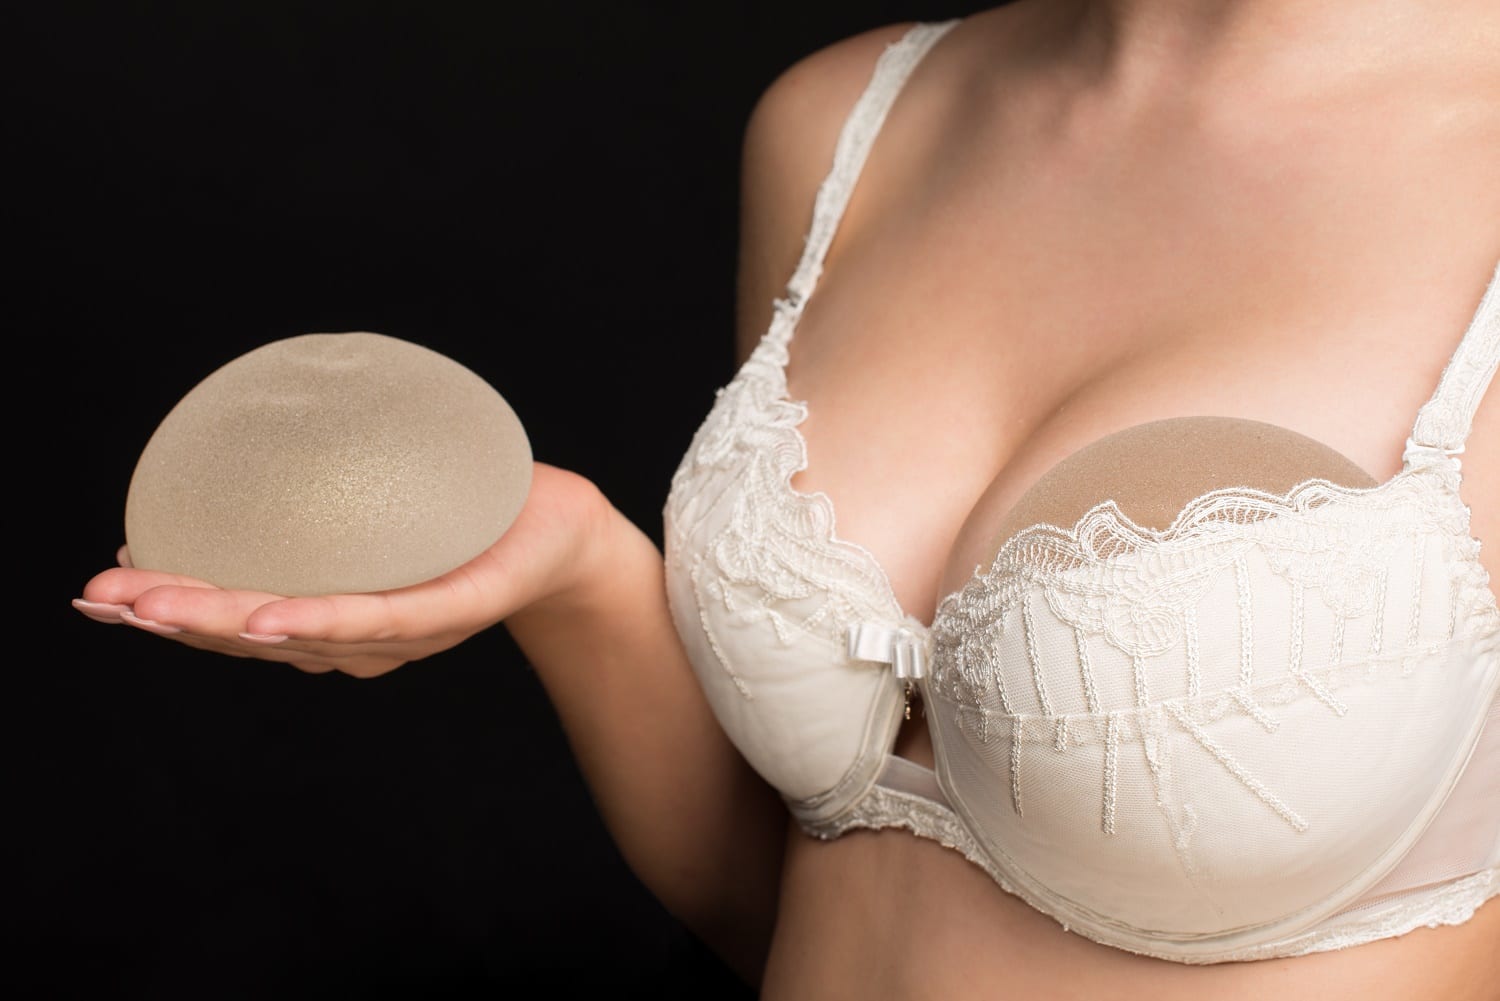 Over or Under the Muscle: Where Should Your Breast Implants Go?